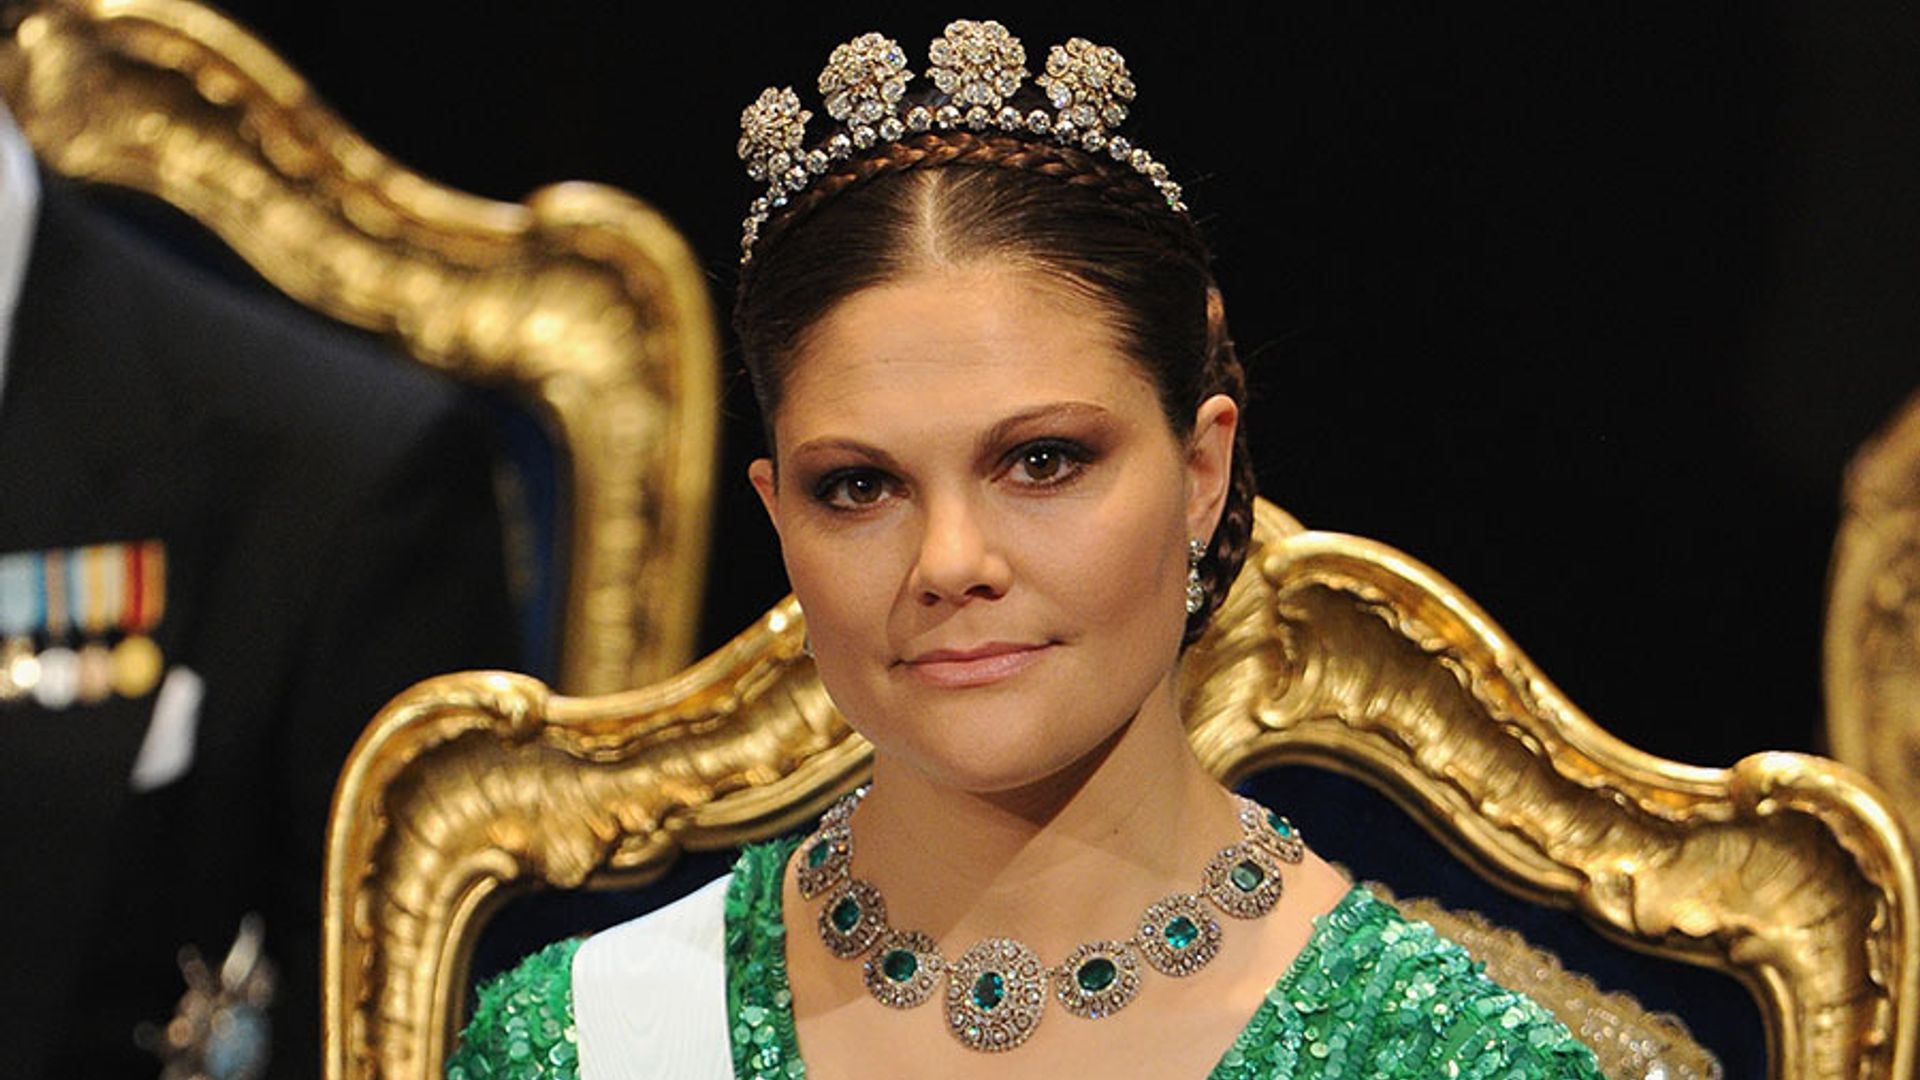 Crown Princess Victoria wows in H&M gown as she receives honour at LGBTQ awards